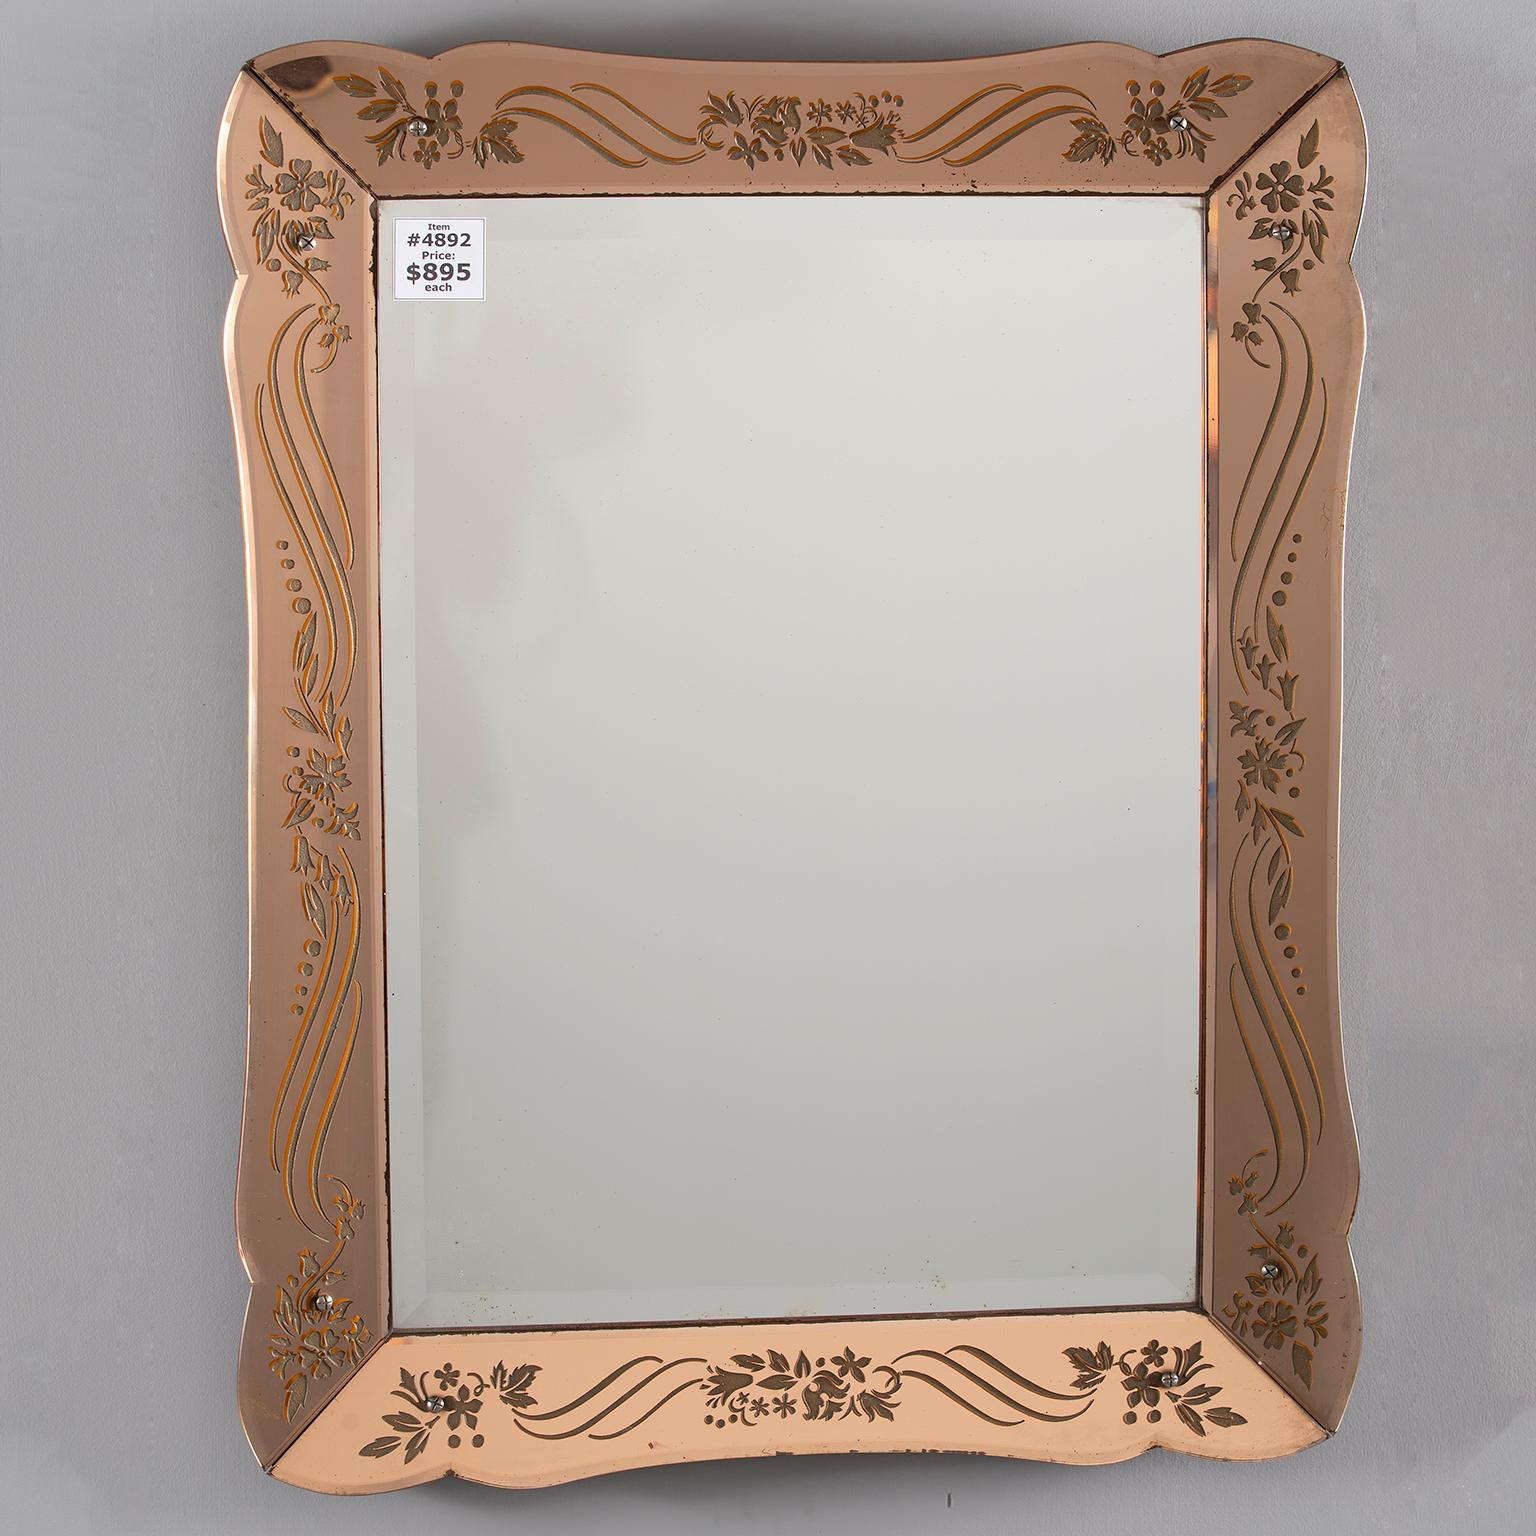 Rectangular Art Deco mirror in pale apricot shade with reverse etched details on frame, circa 1930s. Can be hung either horizontally or vertically. Unknown maker.  Actual Mirror Size:  26.5” h x 19” w
    